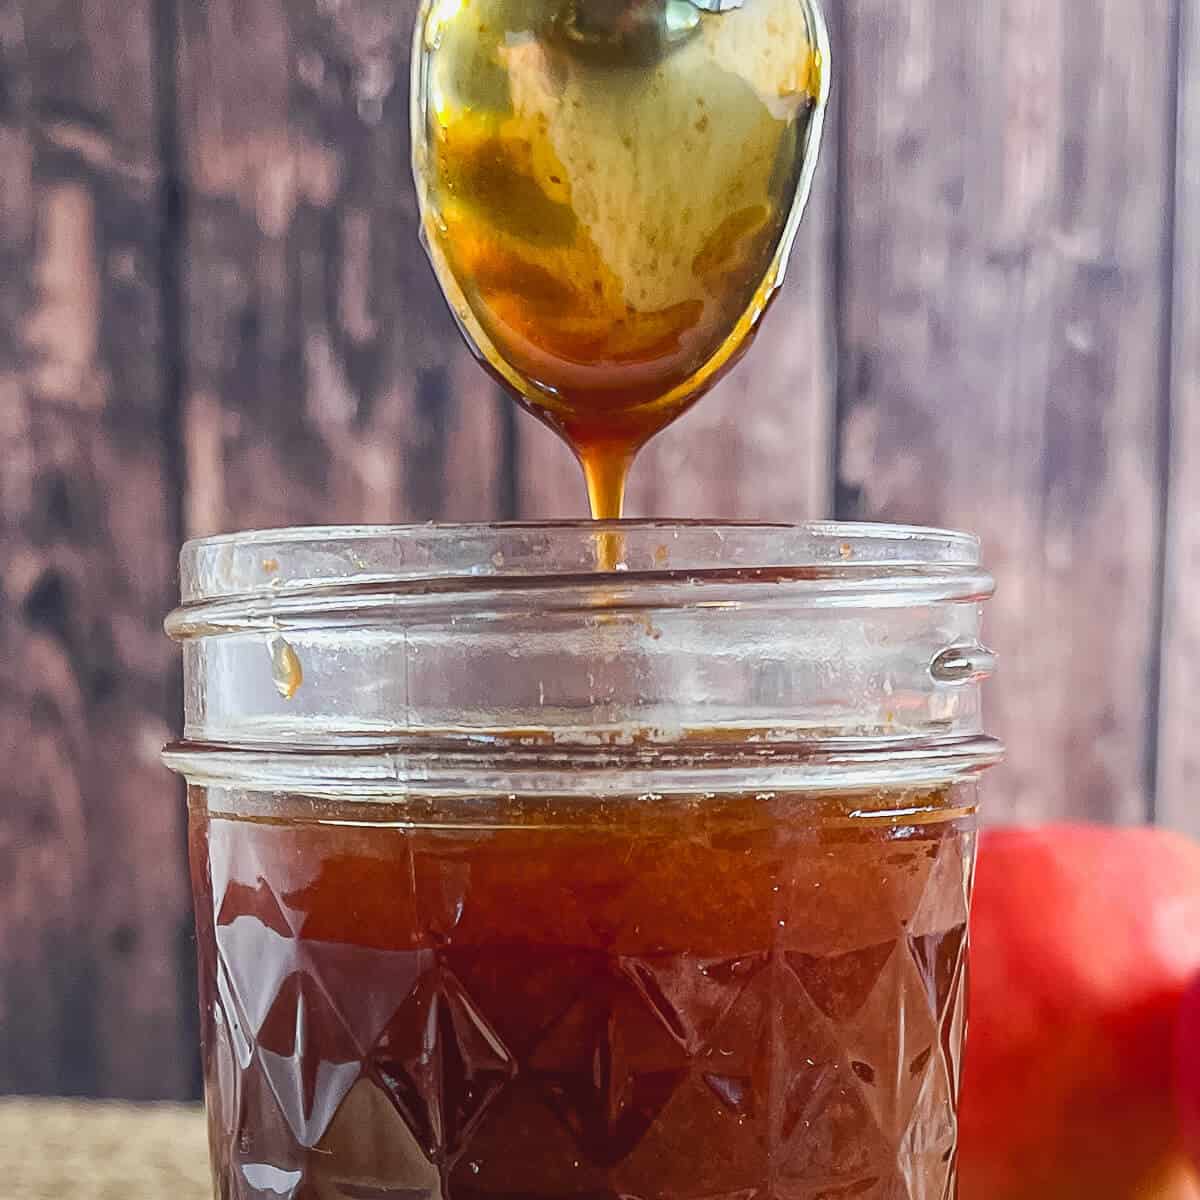 Boiled apple cider dripping from a spoon into a glass jar.